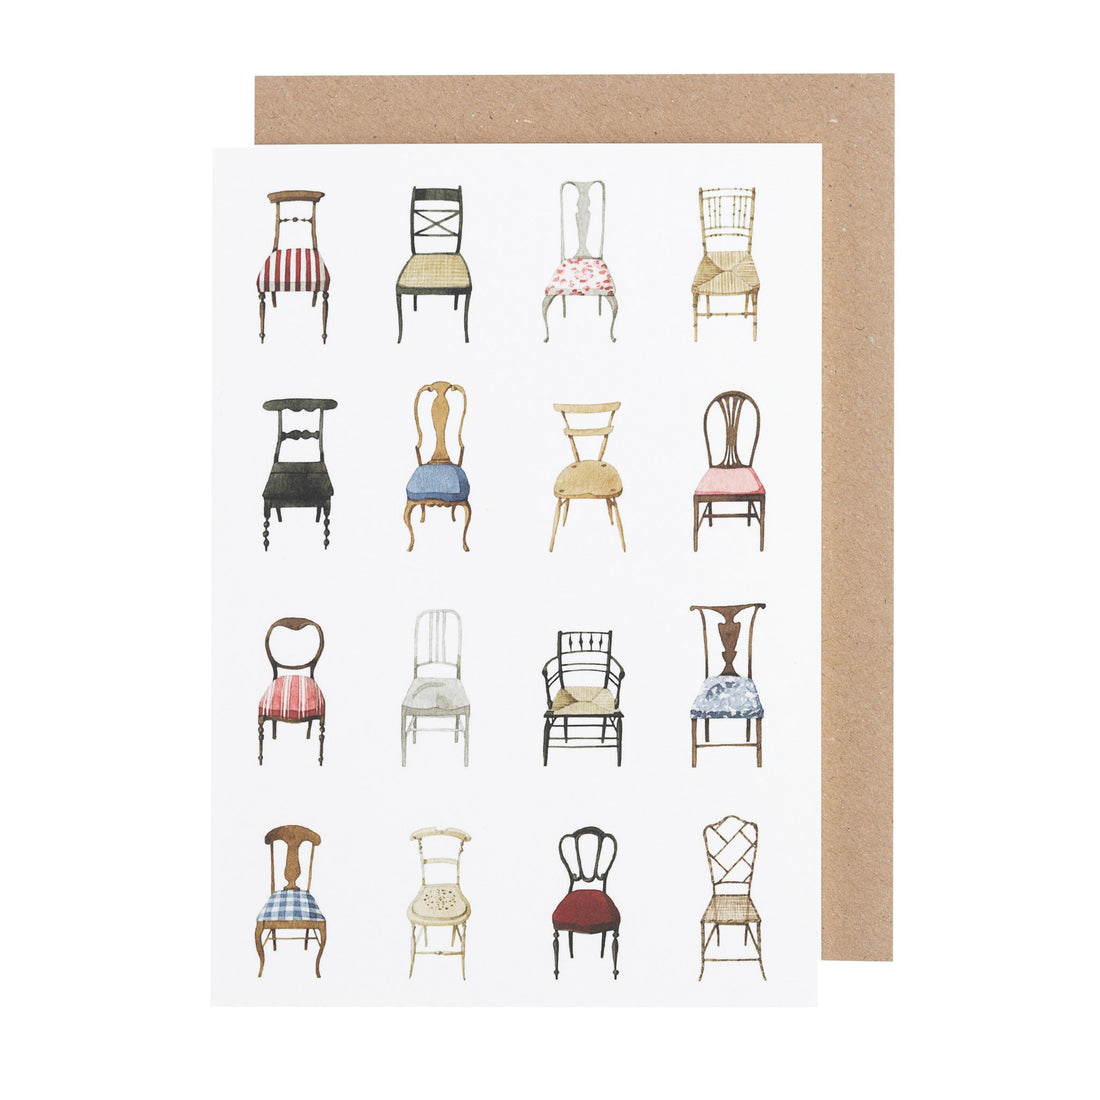 The description of the Musical Chairs Greeting Card by Hester &amp; Cook has not been modified to include the provided keywords.